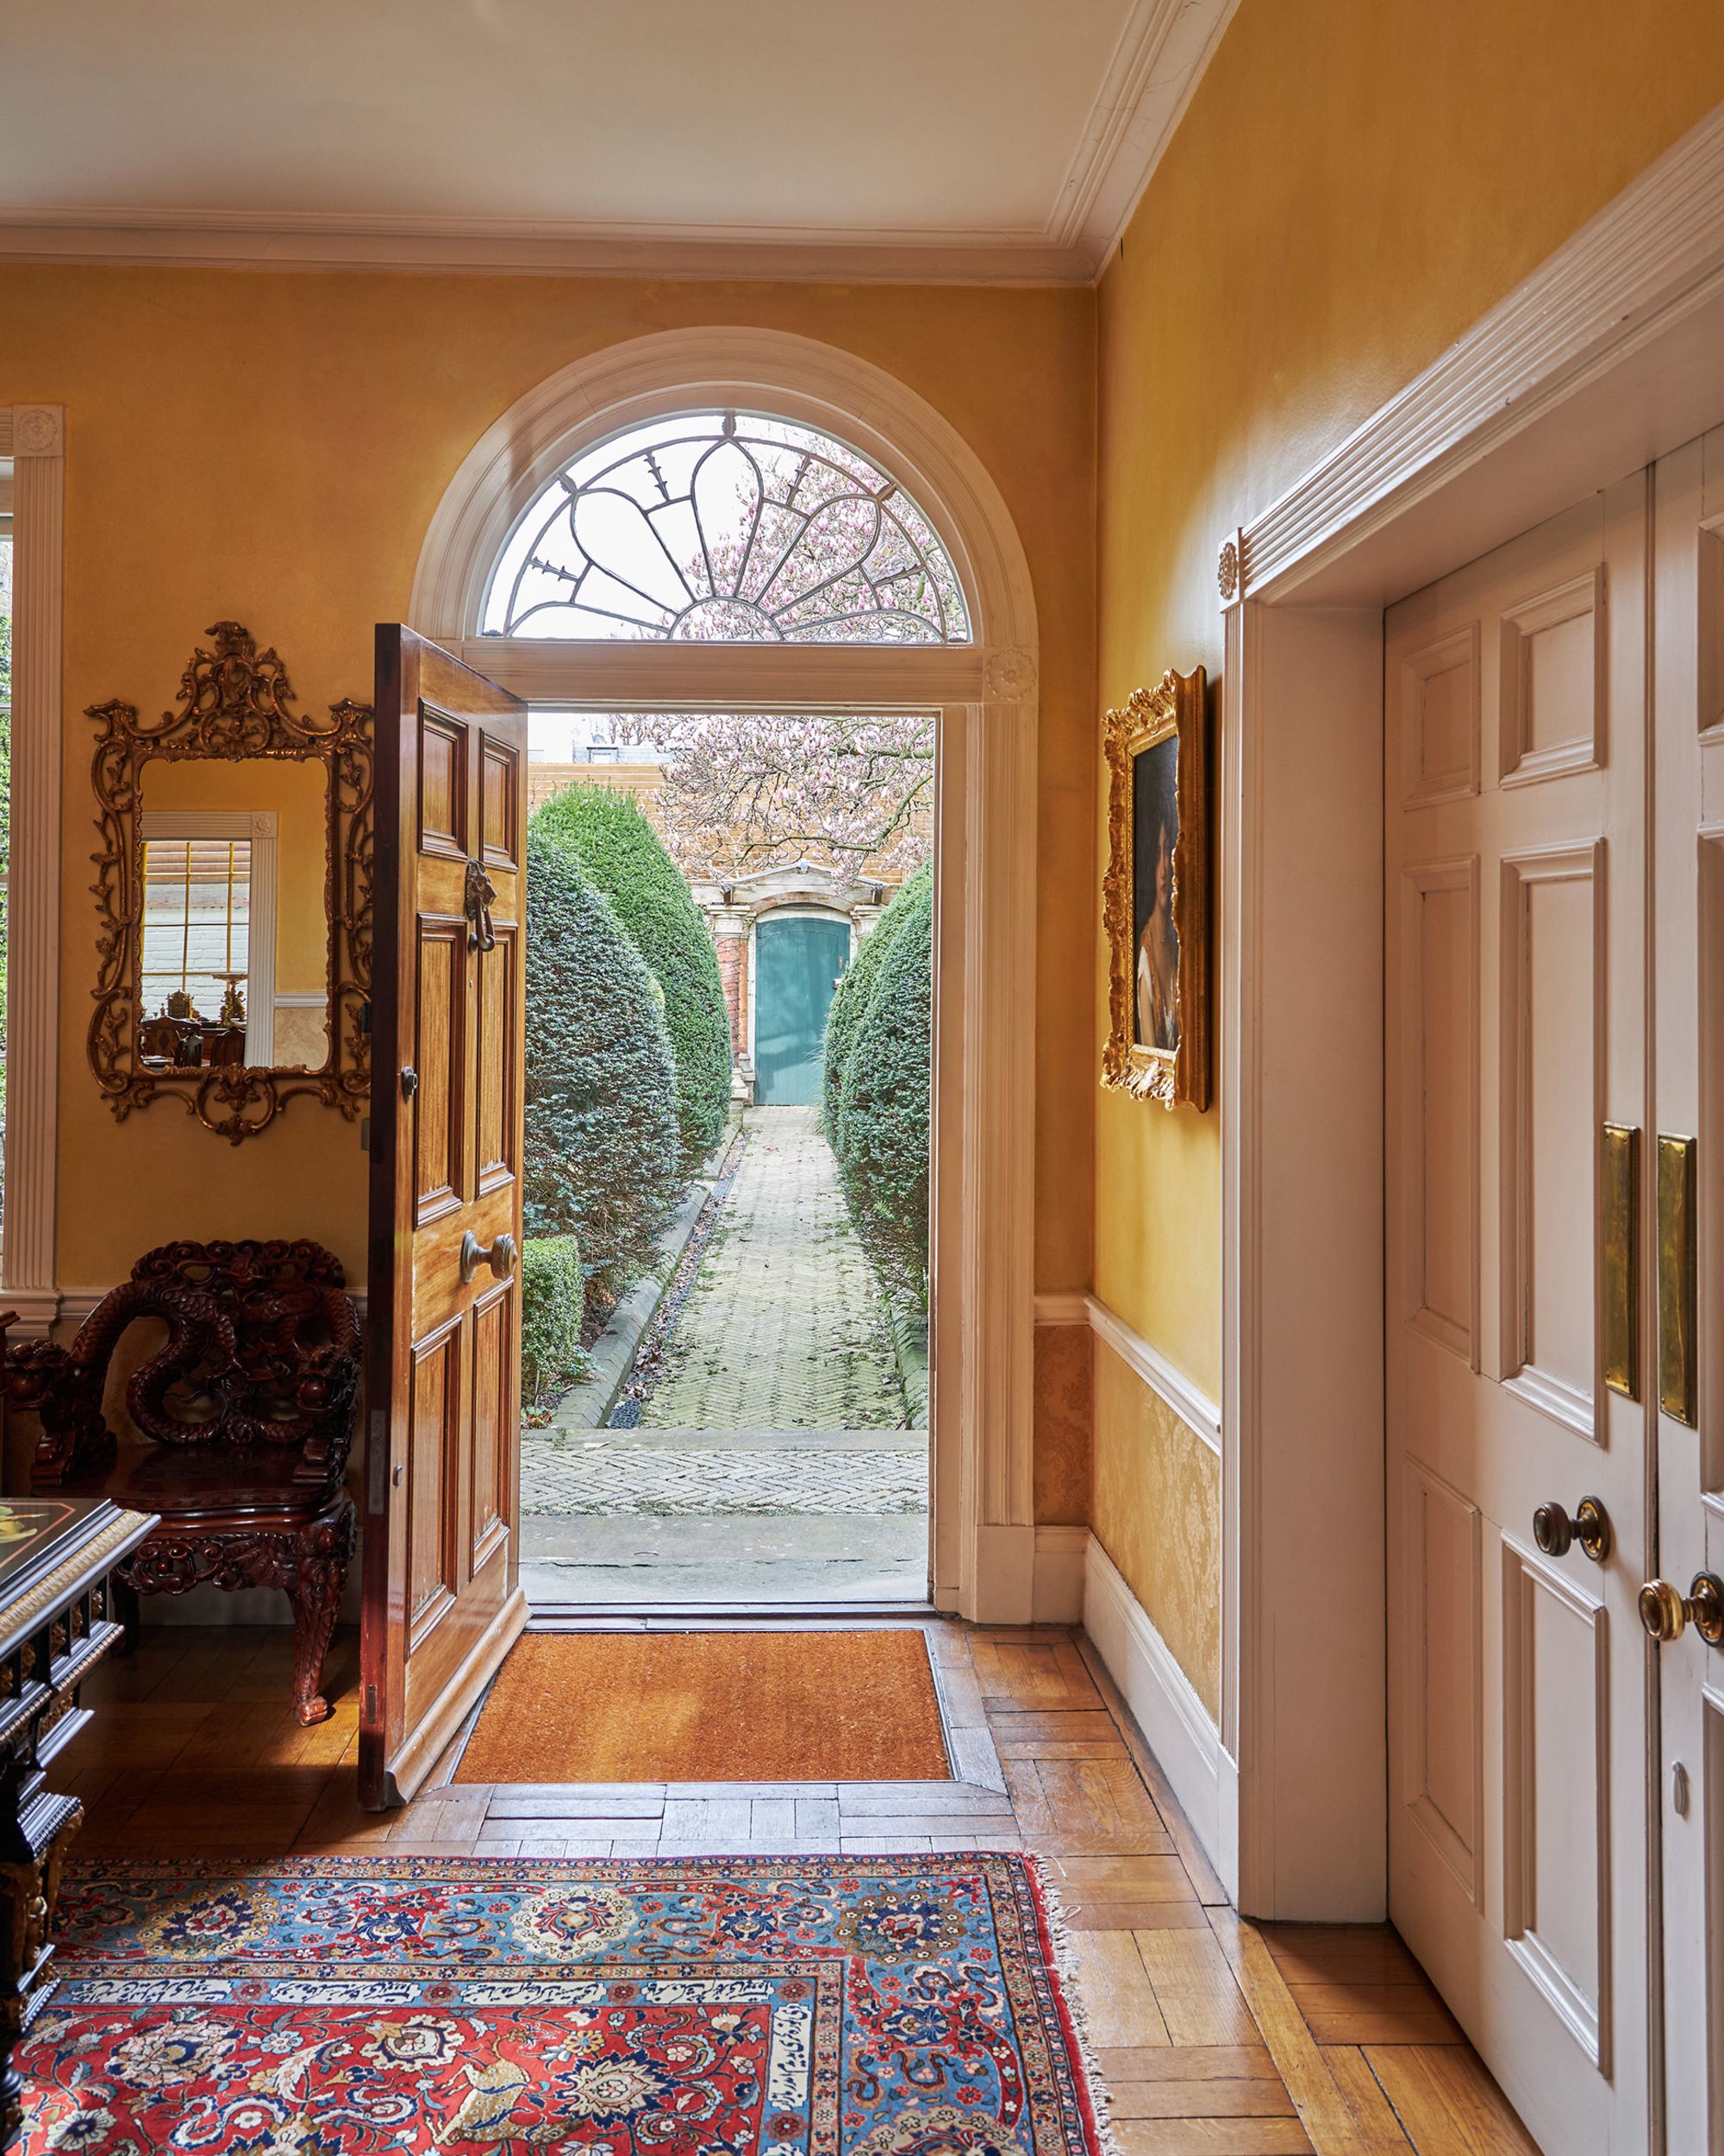 The entrance to Freddie Mercury's former home from its hallway.